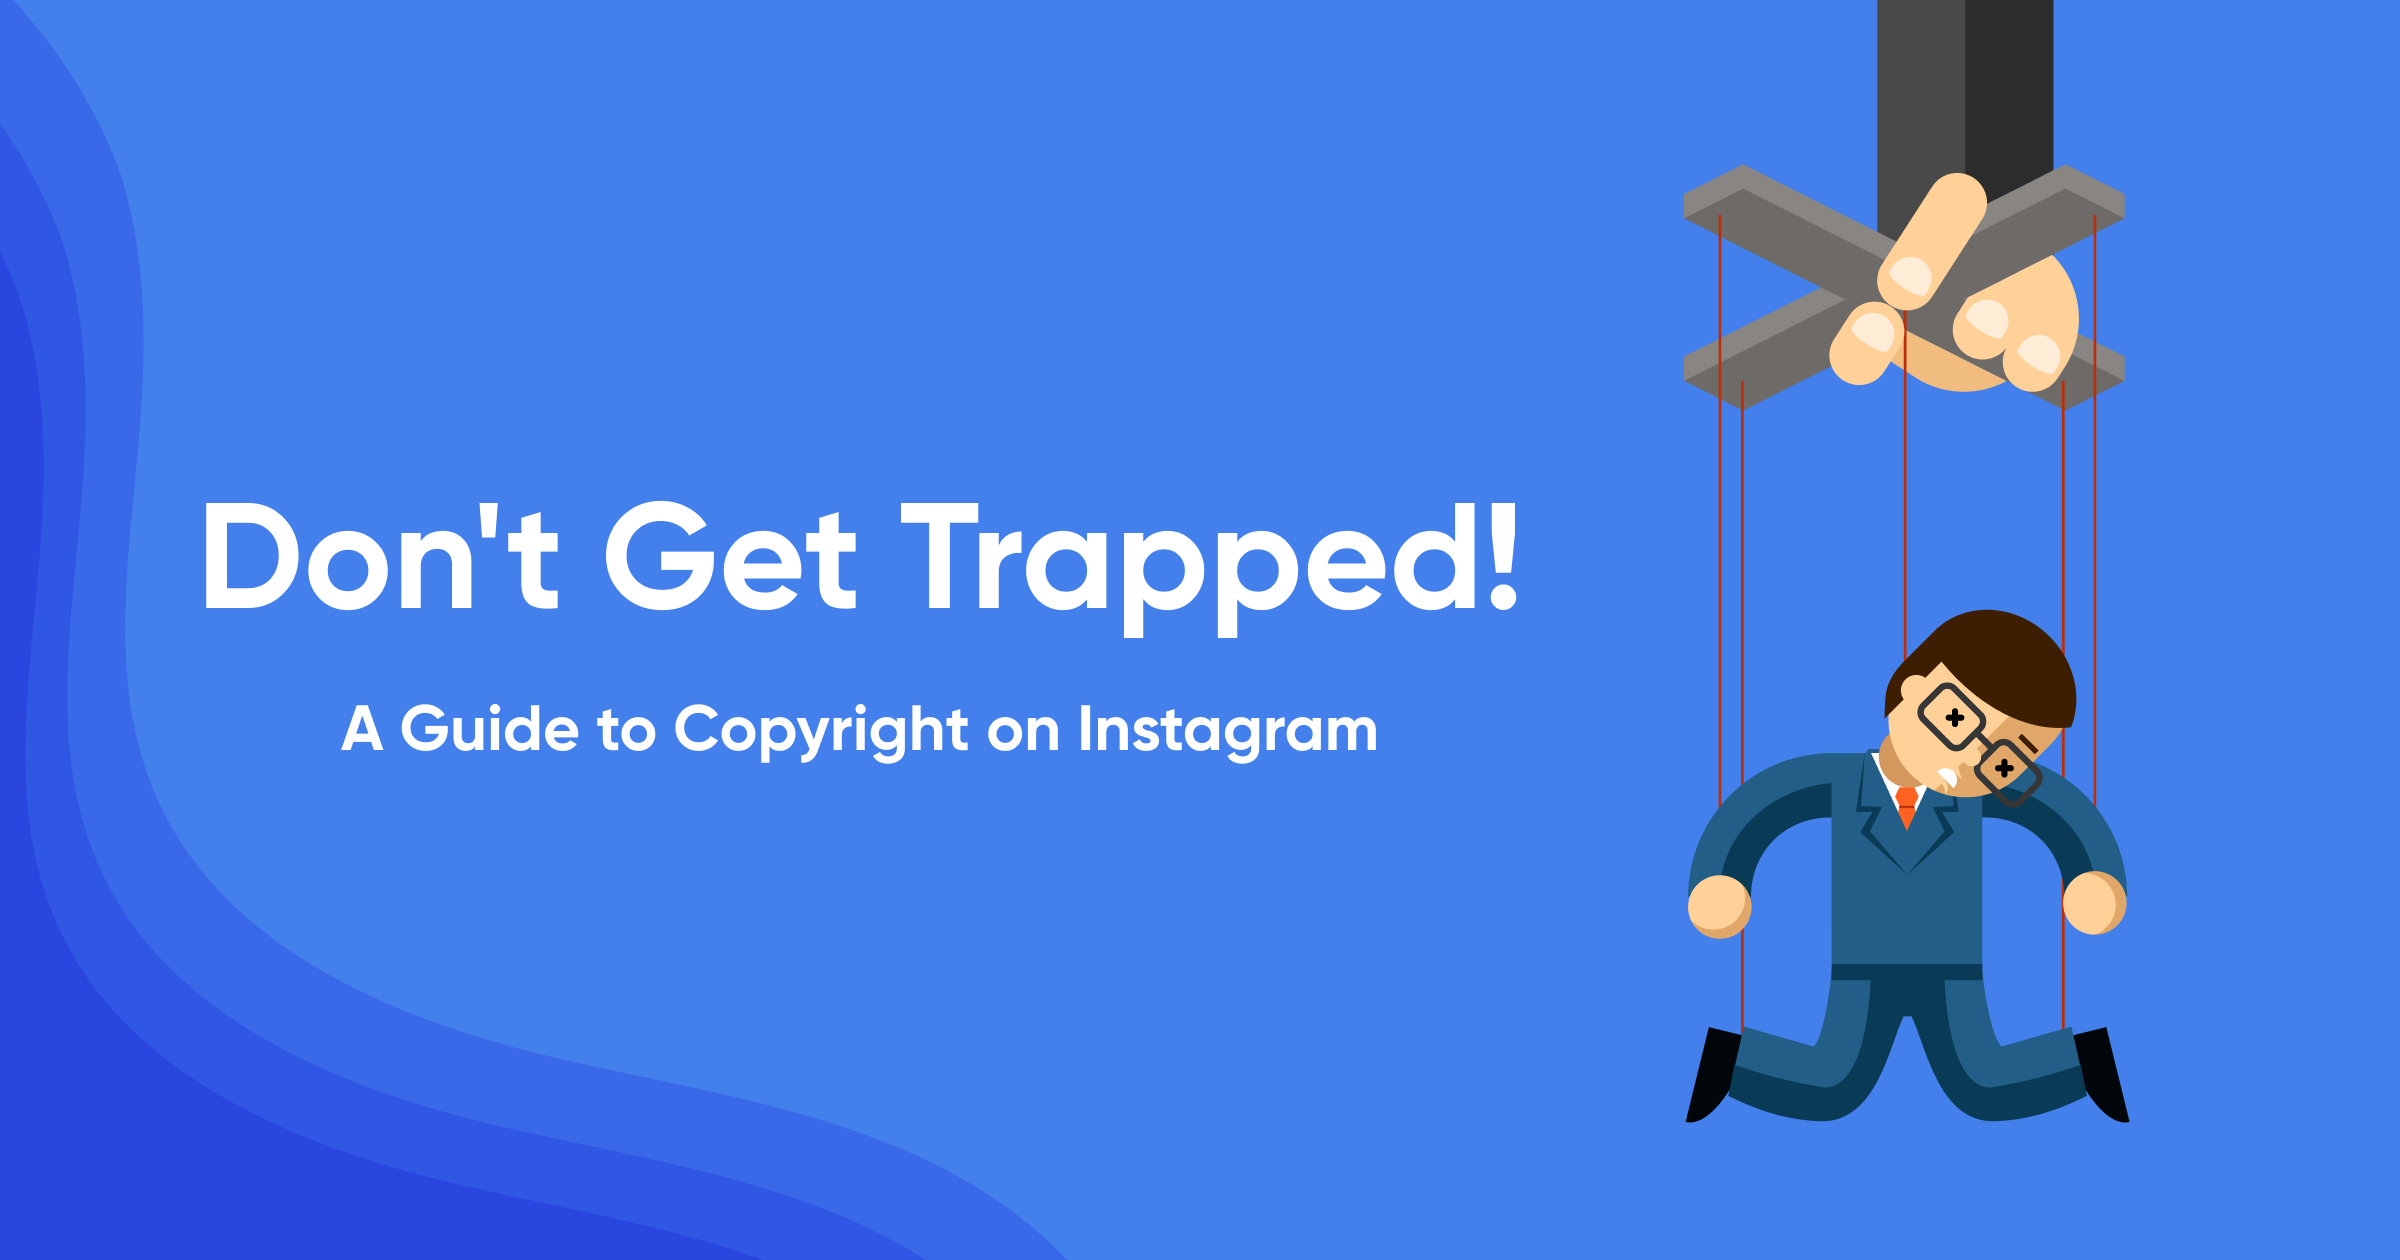 A Guide to Copyright on Instagram